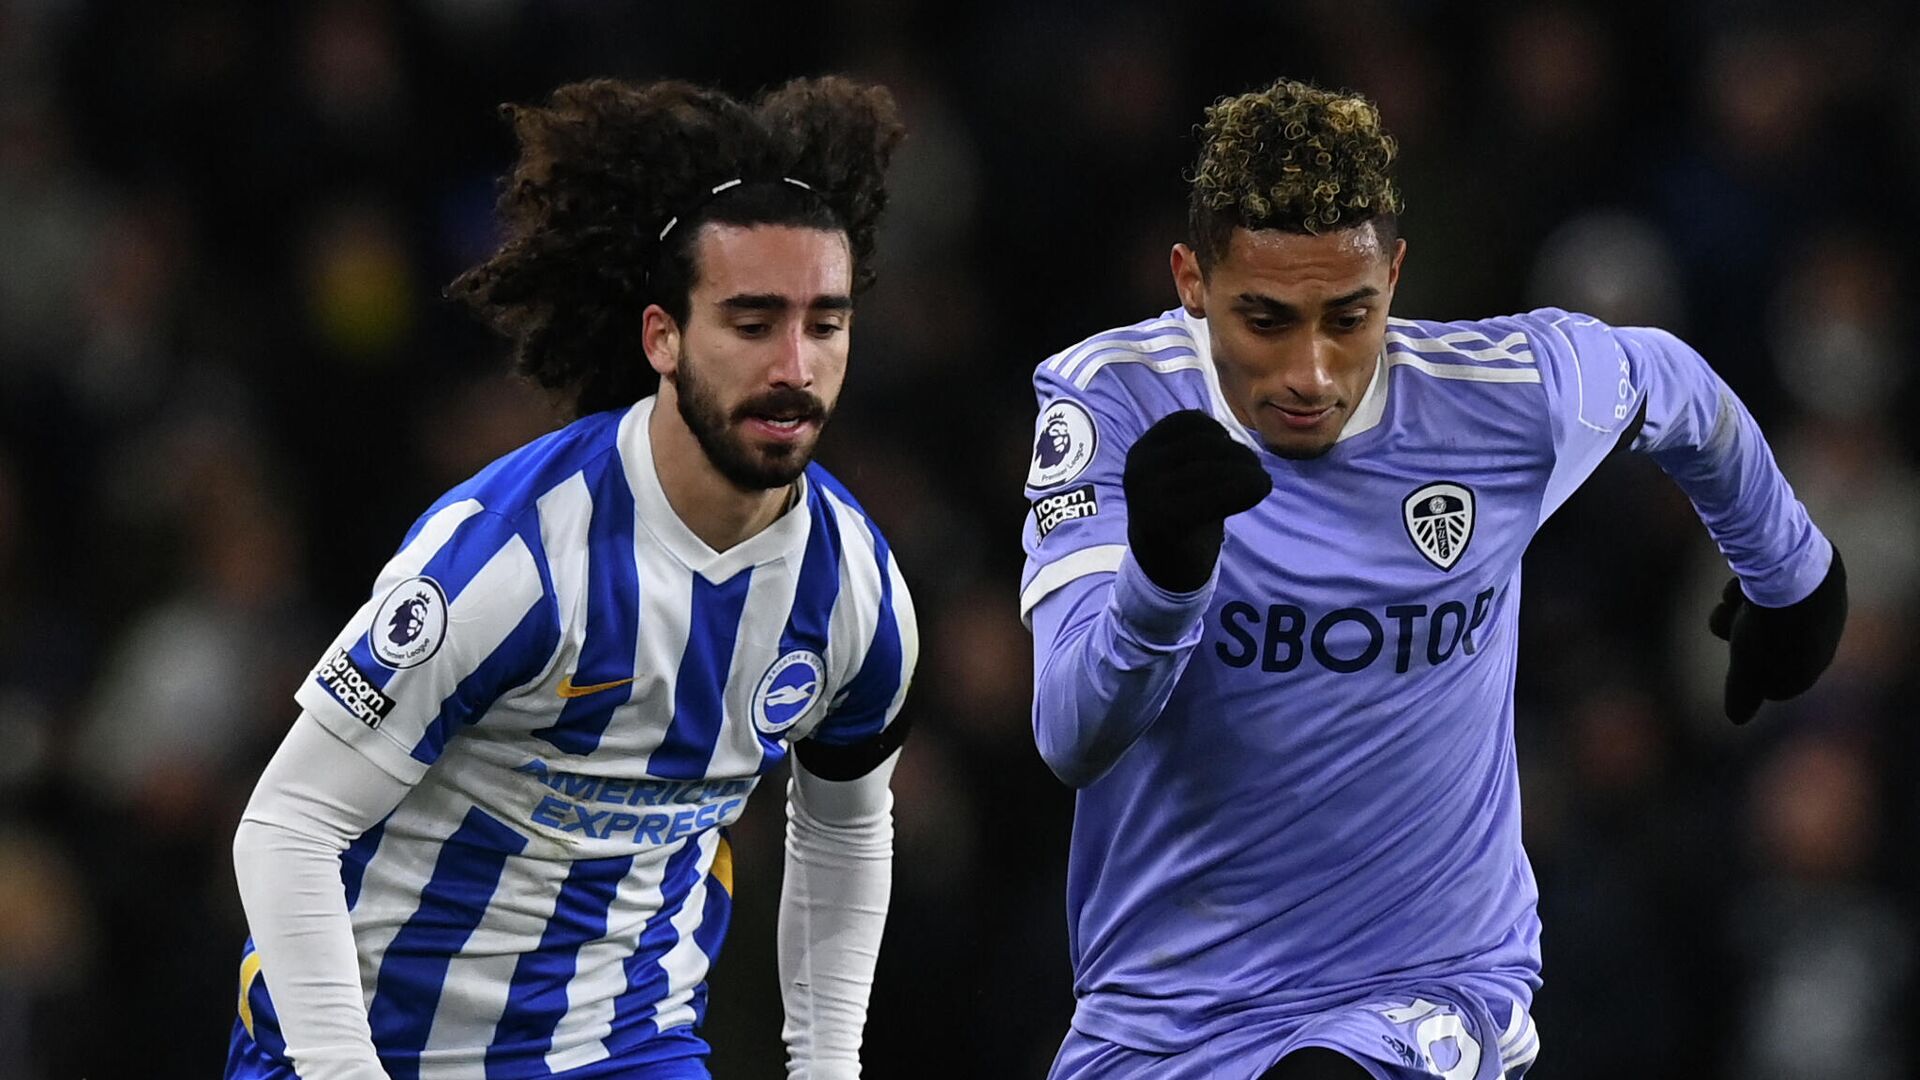 Brighton's Spanish defender Marc Cucurella (L) vies with Leeds United's Brazilian midfielder Raphinha Dias Belloli (R) during the English Premier League football match between Brighton and Hove Albion and Leeds United at the American Express Community Stadium in Brighton, southern England on November 27, 2021. (Photo by Glyn KIRK / AFP) / RESTRICTED TO EDITORIAL USE. No use with unauthorized audio, video, data, fixture lists, club/league logos or 'live' services. Online in-match use limited to 120 images. An additional 40 images may be used in extra time. No video emulation. Social media in-match use limited to 120 images. An additional 40 images may be used in extra time. No use in betting publications, games or single club/league/player publications. /  - РИА Новости, 1920, 27.11.2021